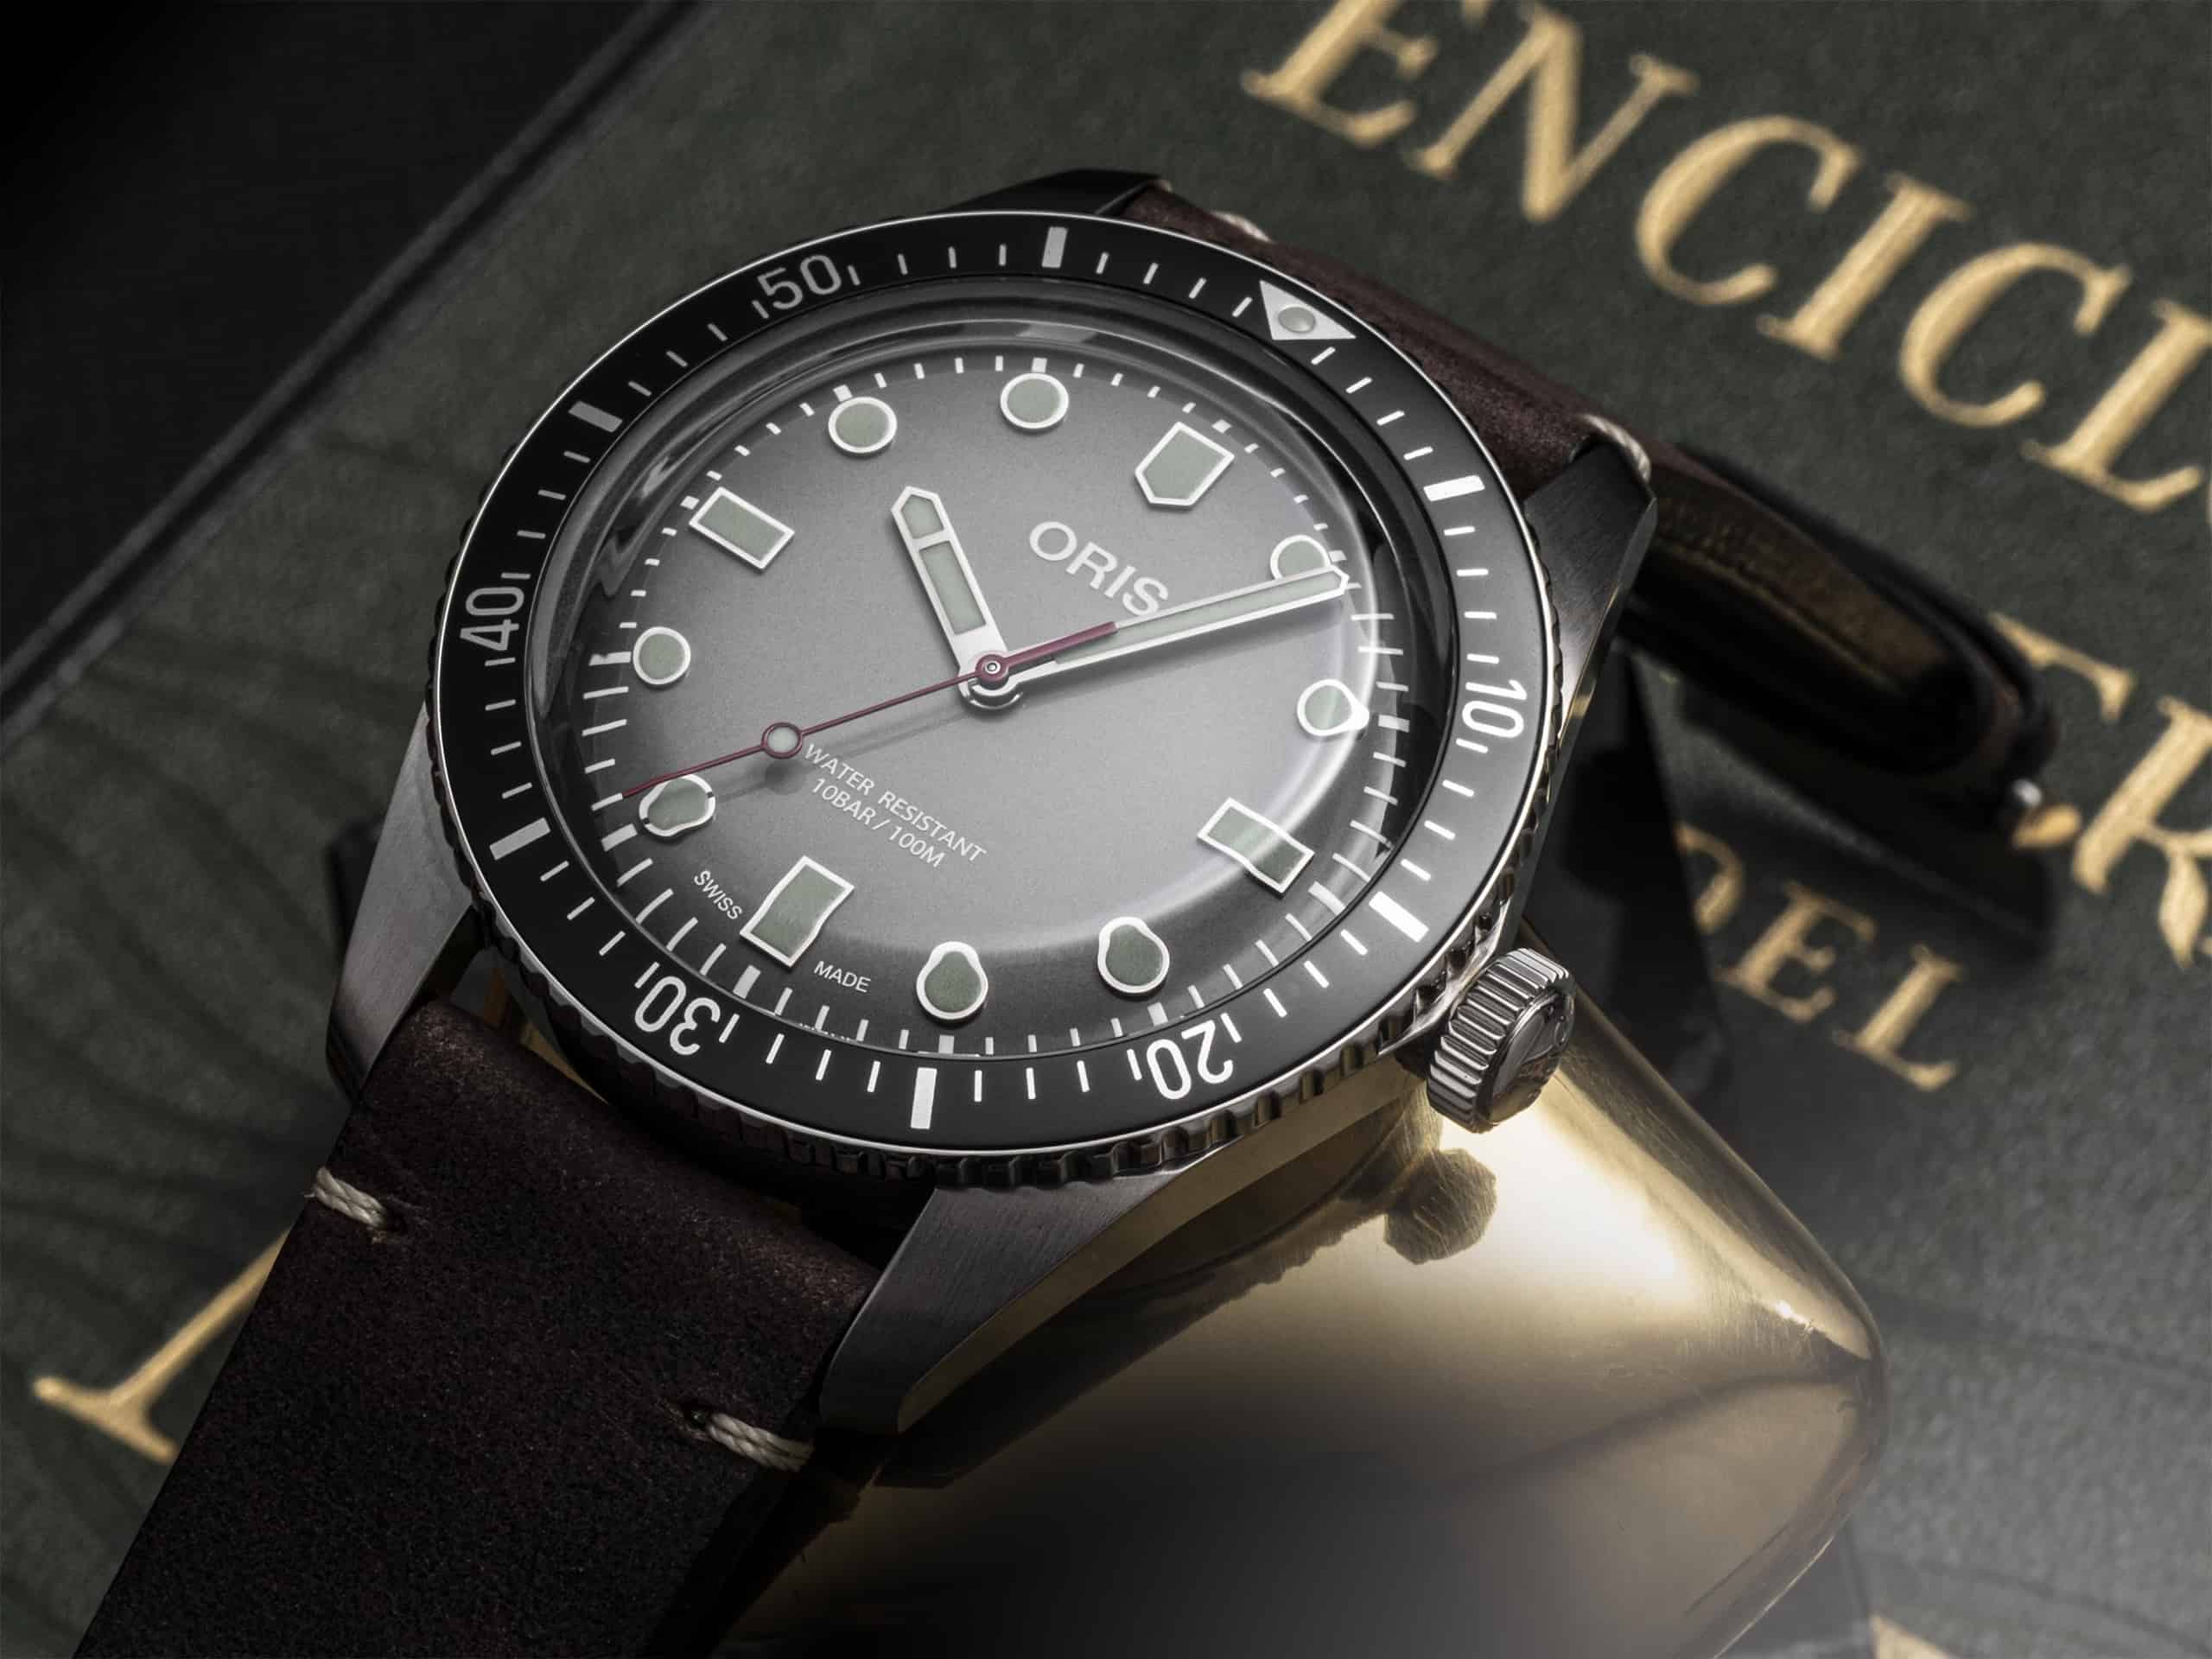 CronotempVs Collectors & Oris Create Ultra-Limited Spirit of Sixty-Five Diver